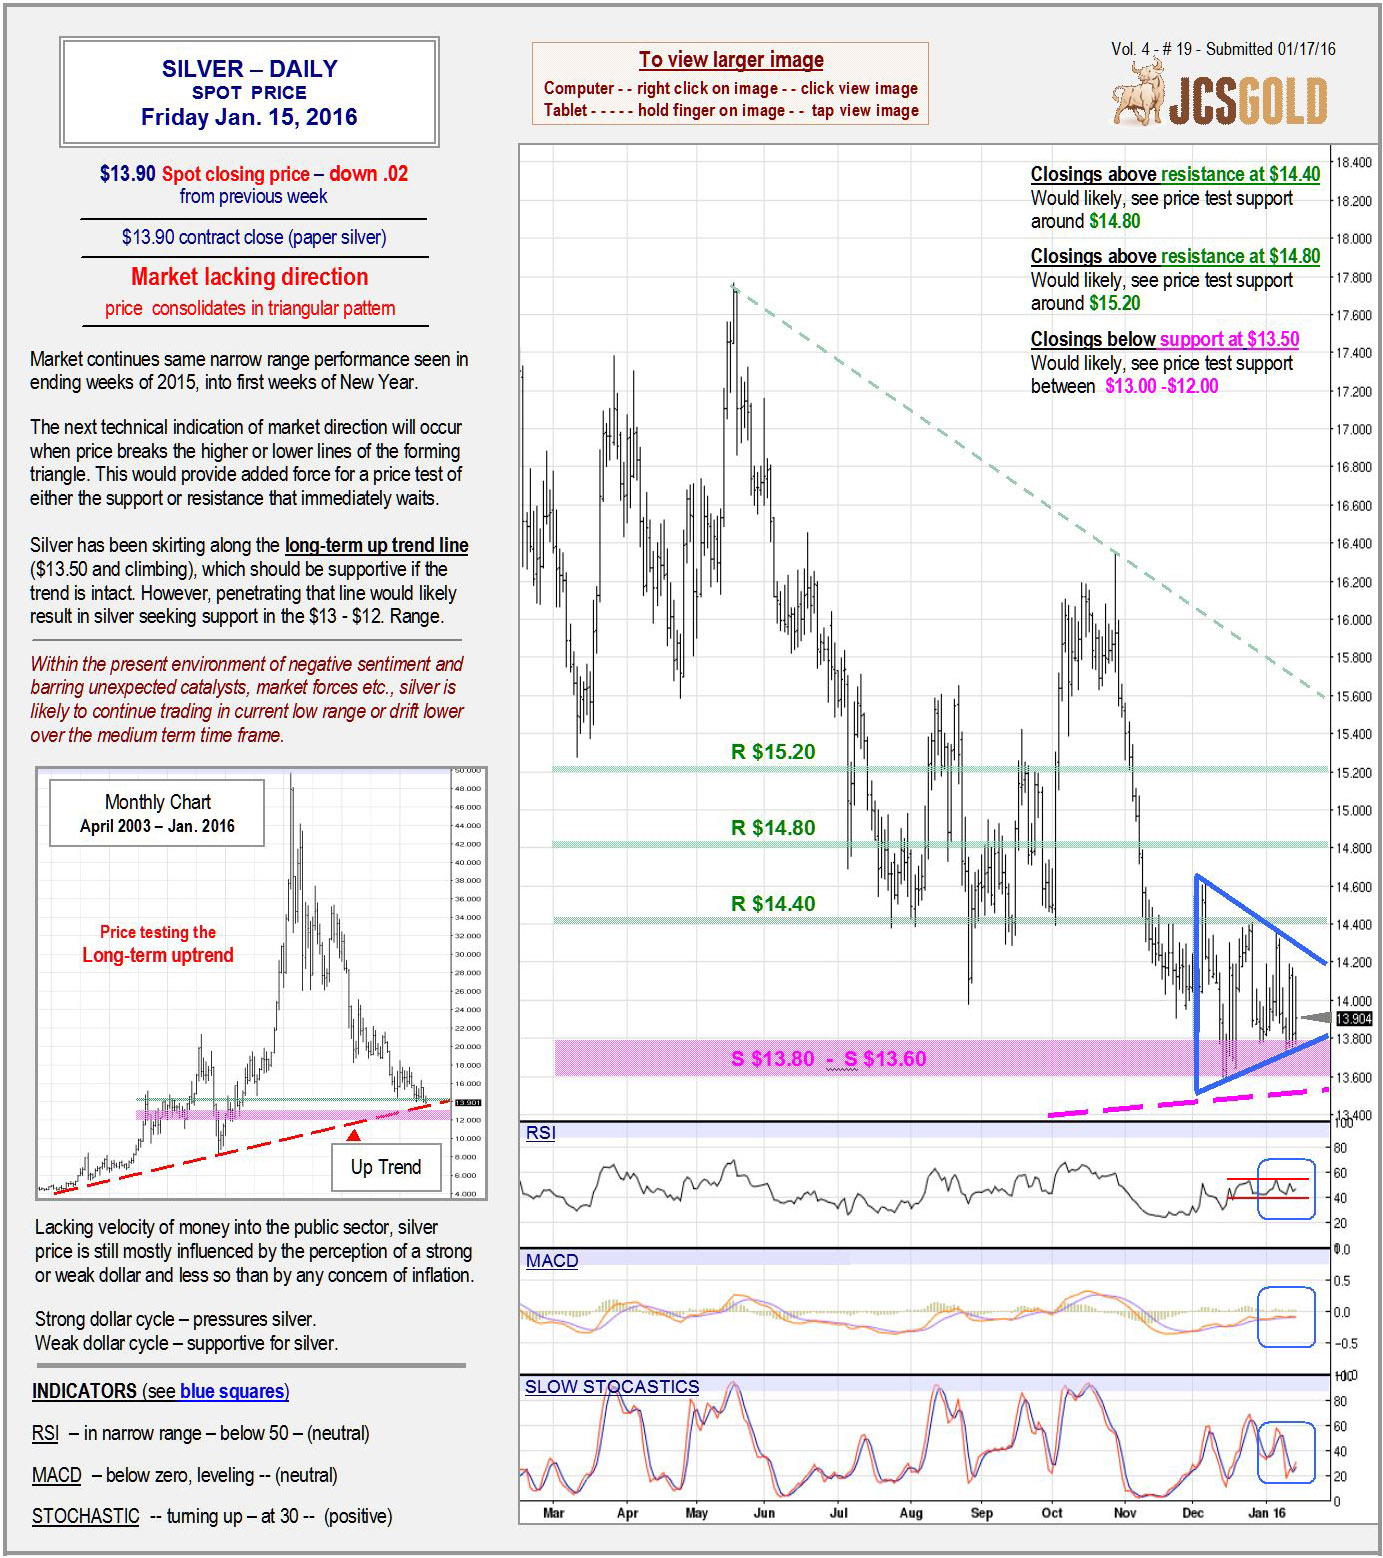 Jan 15, 2016 chart & commentary